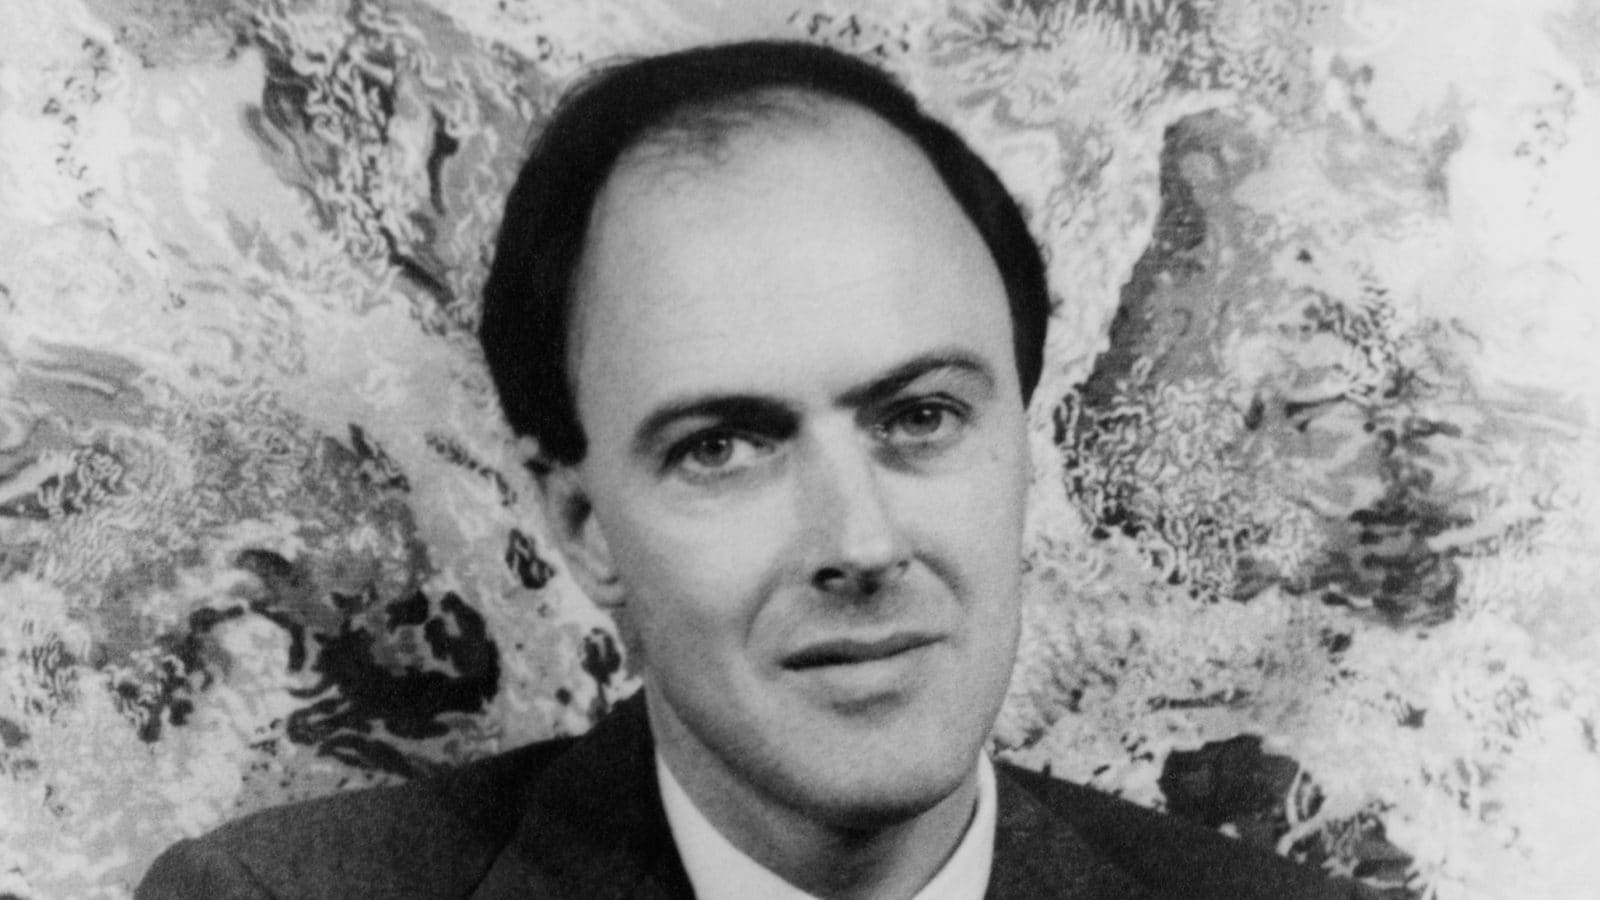 Rushdie, Sunak Condemn Rewriting Roald Dahl; What Is The Fuss About?